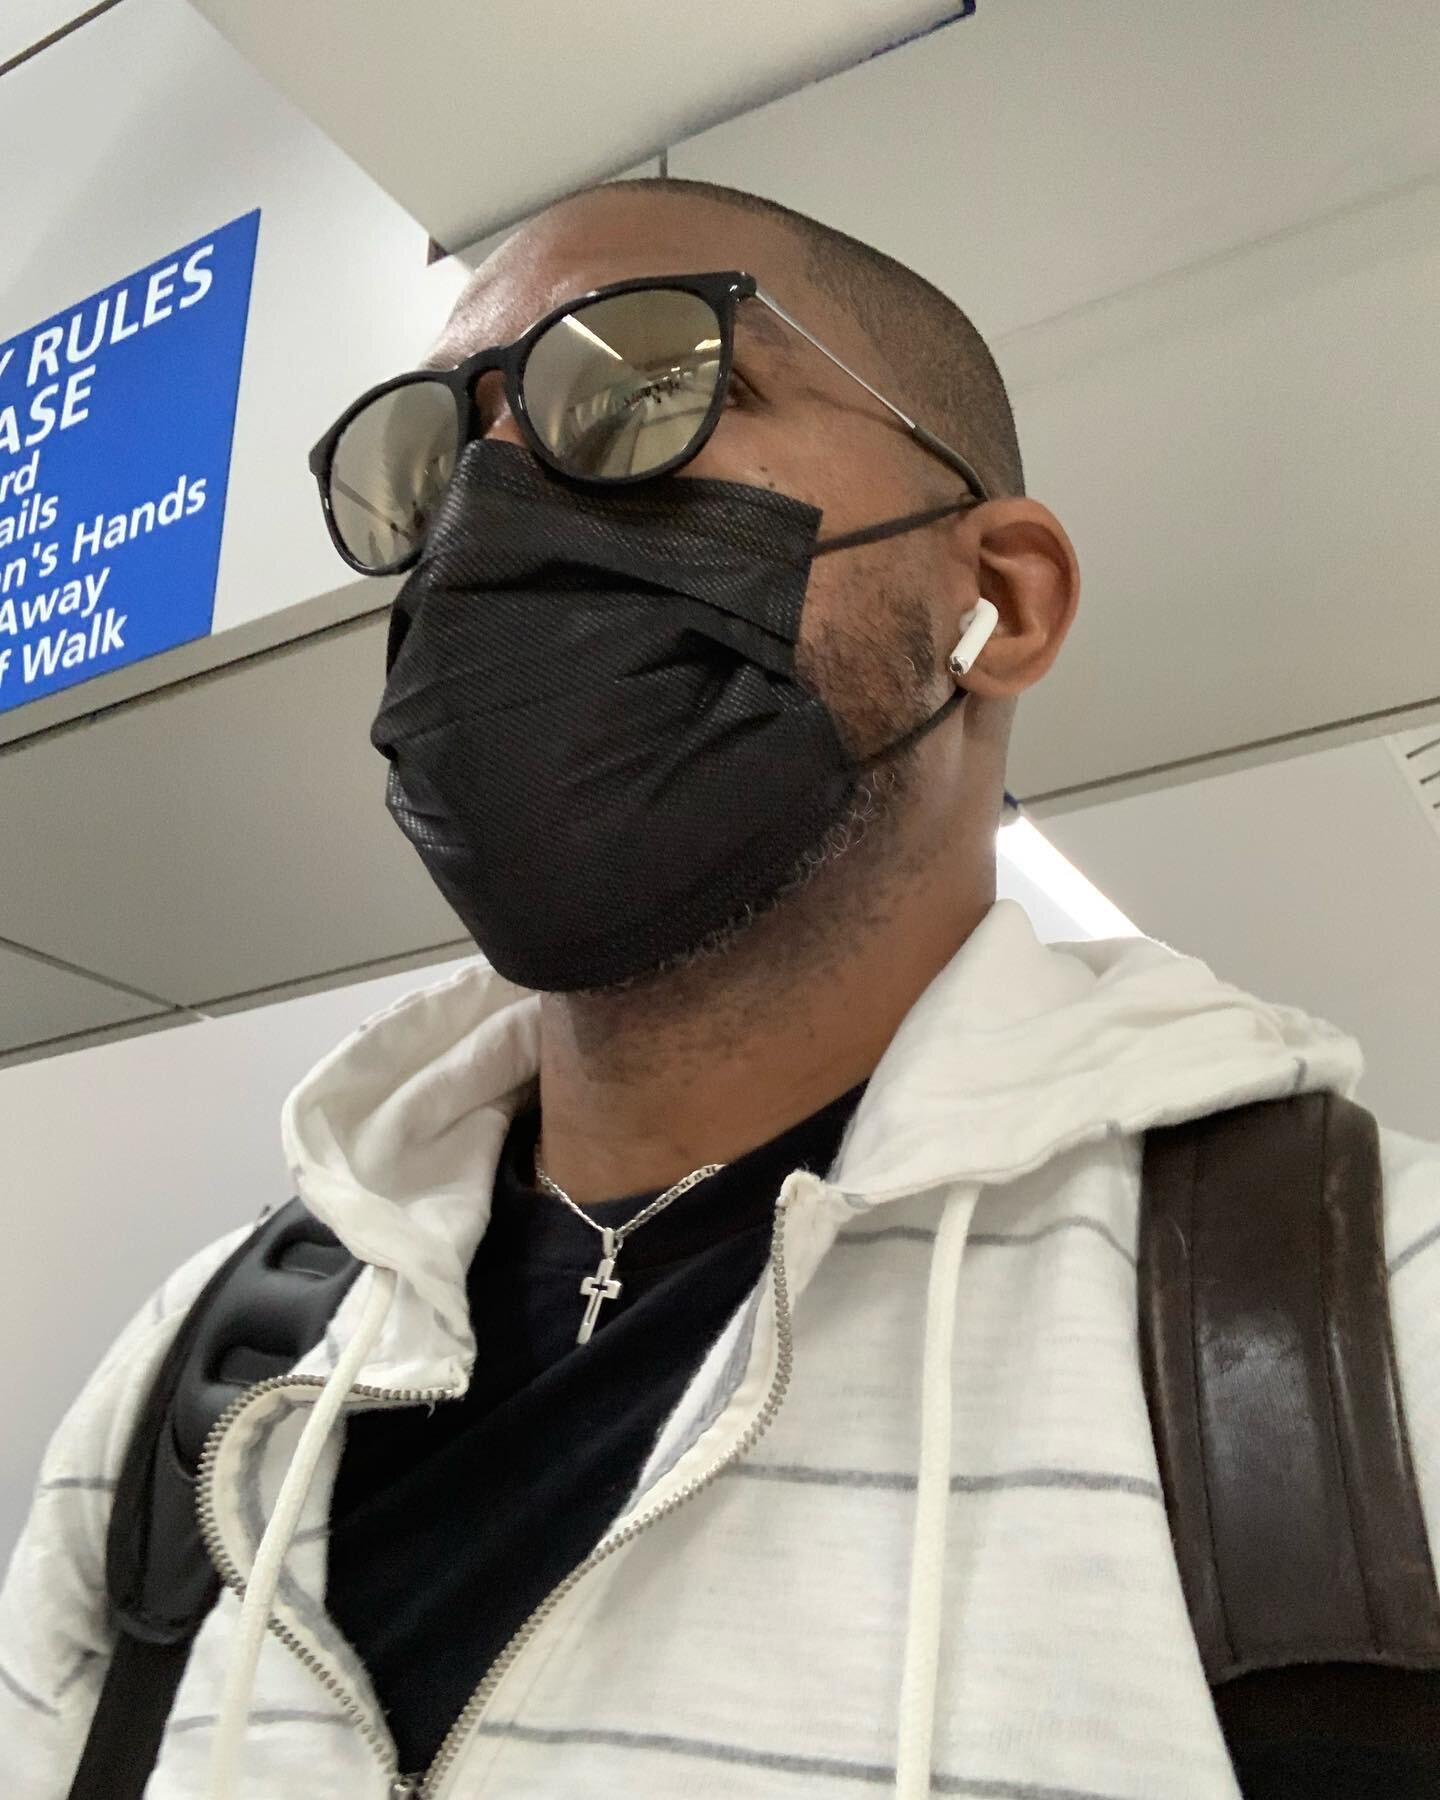 Airport strut to that AirPod theme music. 

&lsquo;I needed [a hit] with some #bop in it.&rsquo; @dababy